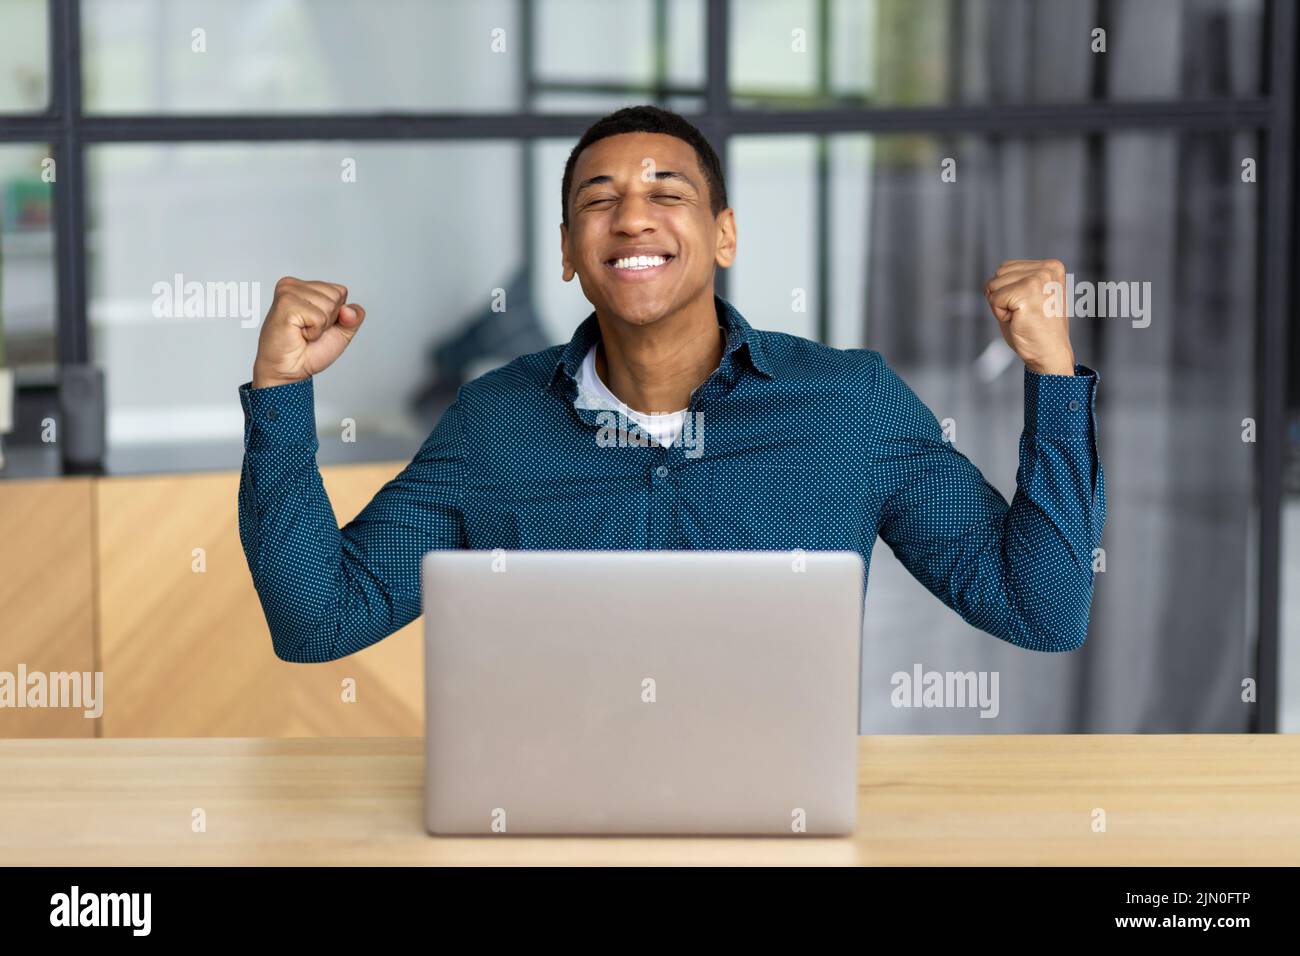 Excited young man celebrating success while sitting with laptop workplace Happy businessperson male having good news Stock Photo